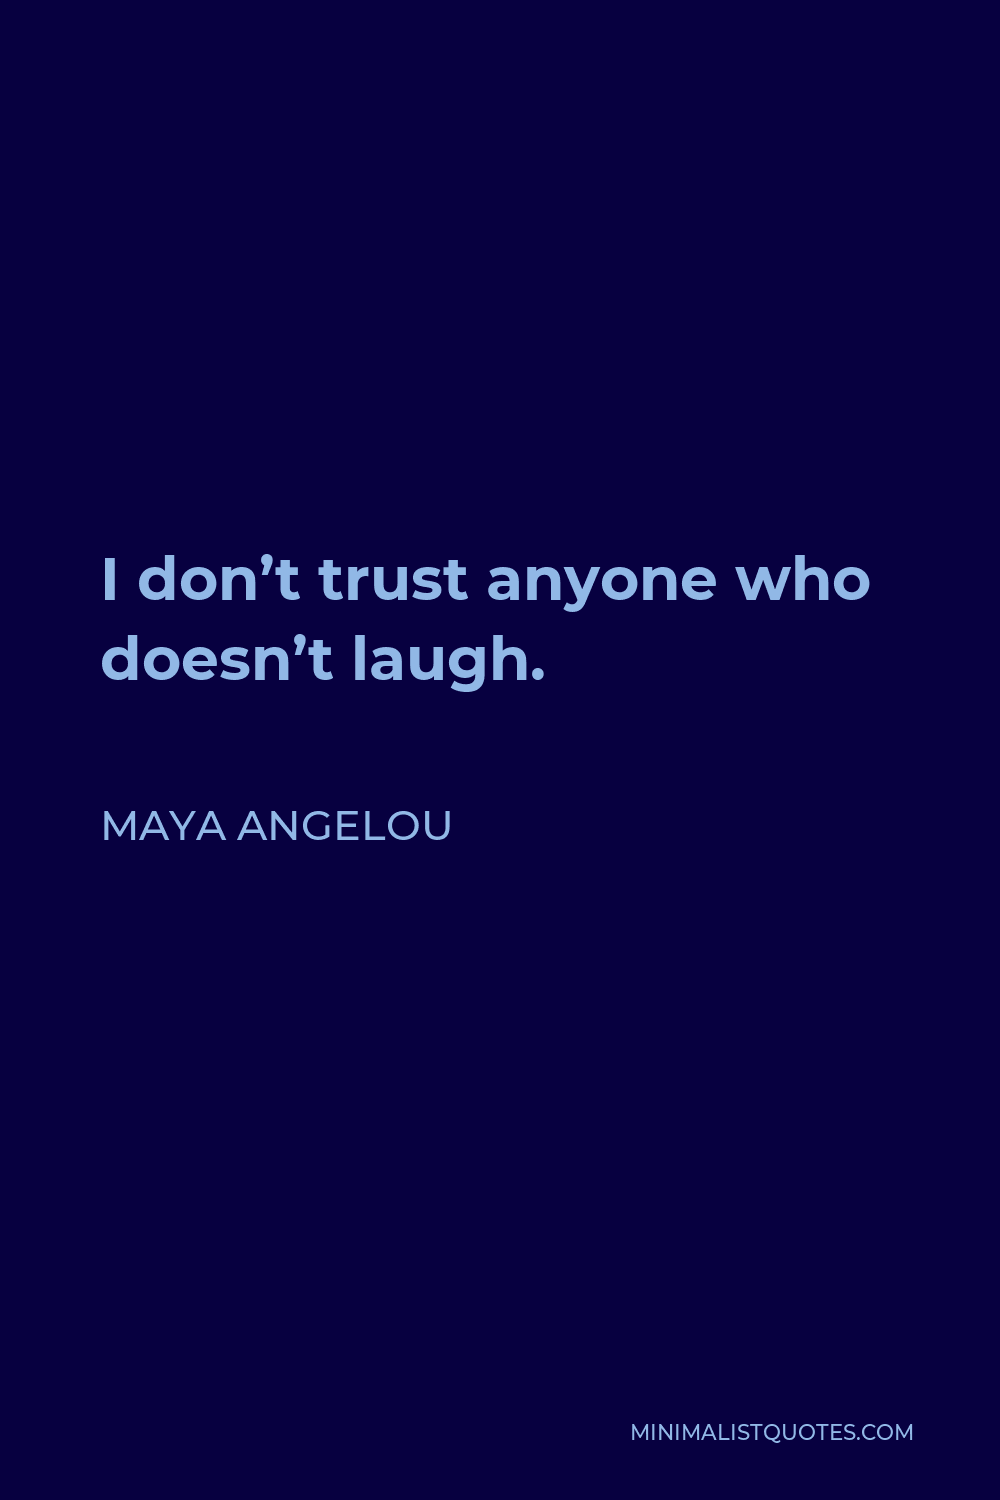 Maya Angelou Quote: I don't trust anyone who doesn't laugh.